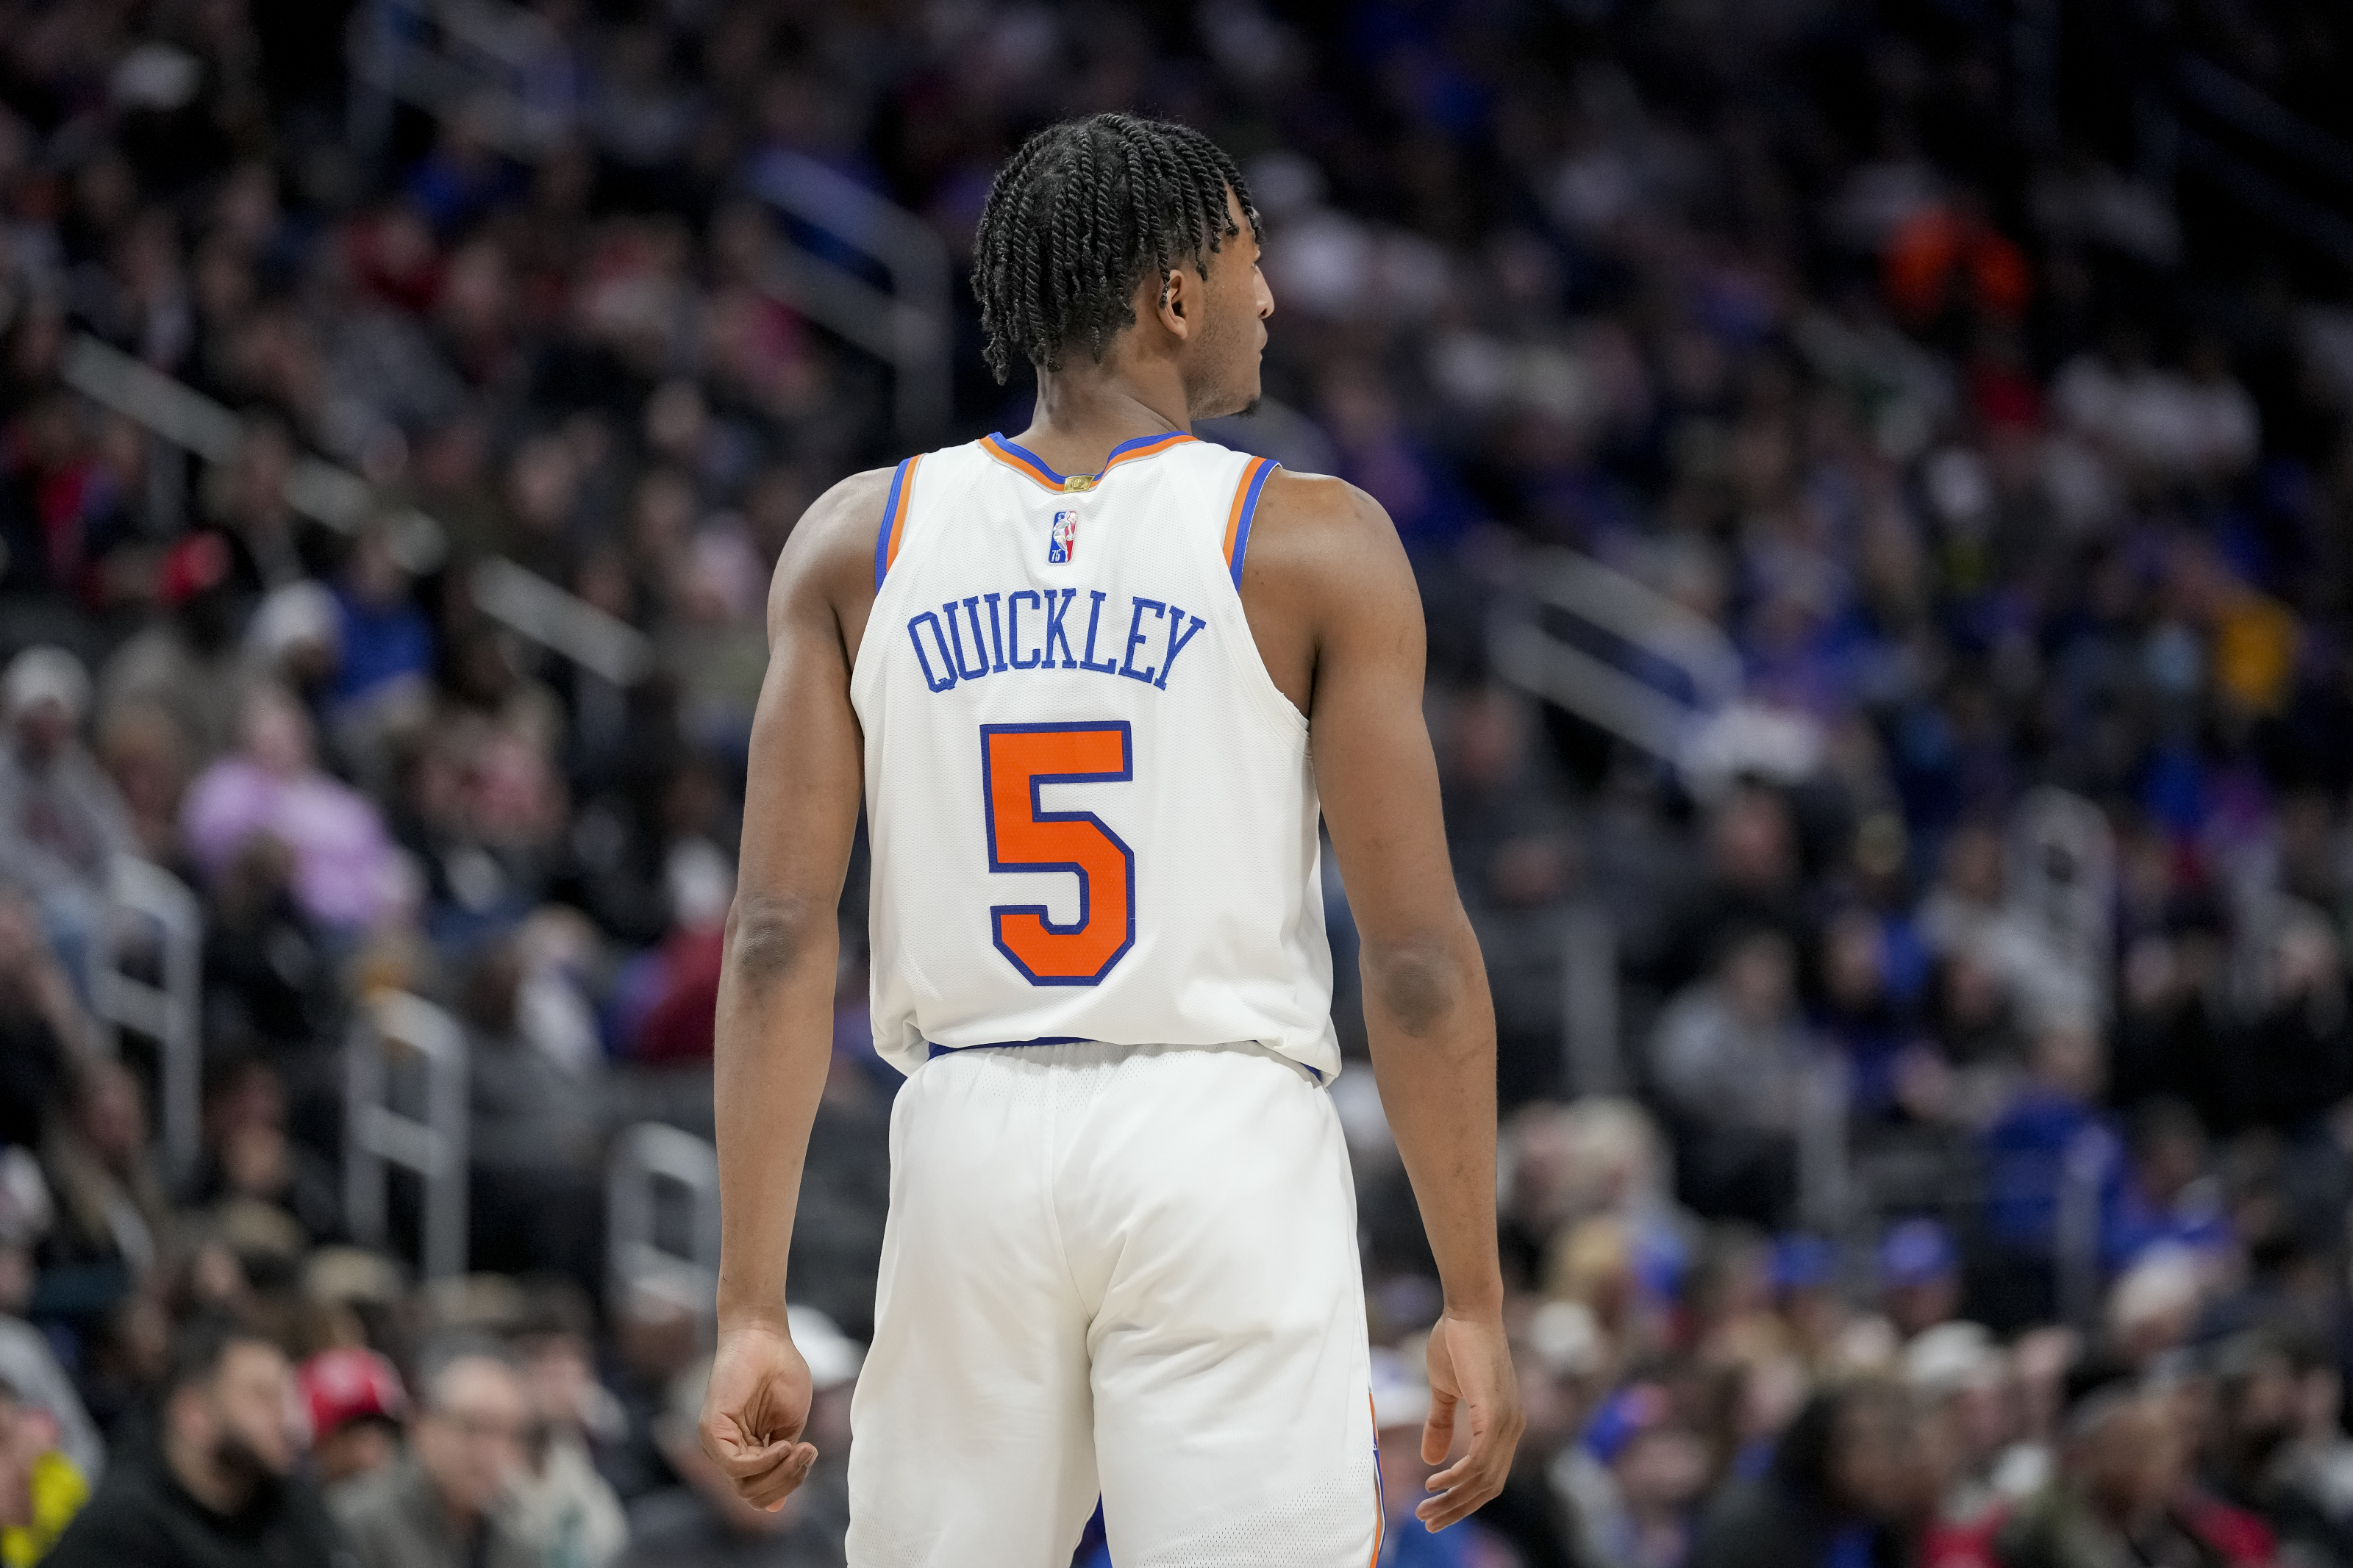 Immanuel Quickley Extension Could Benefit Knicks Financially